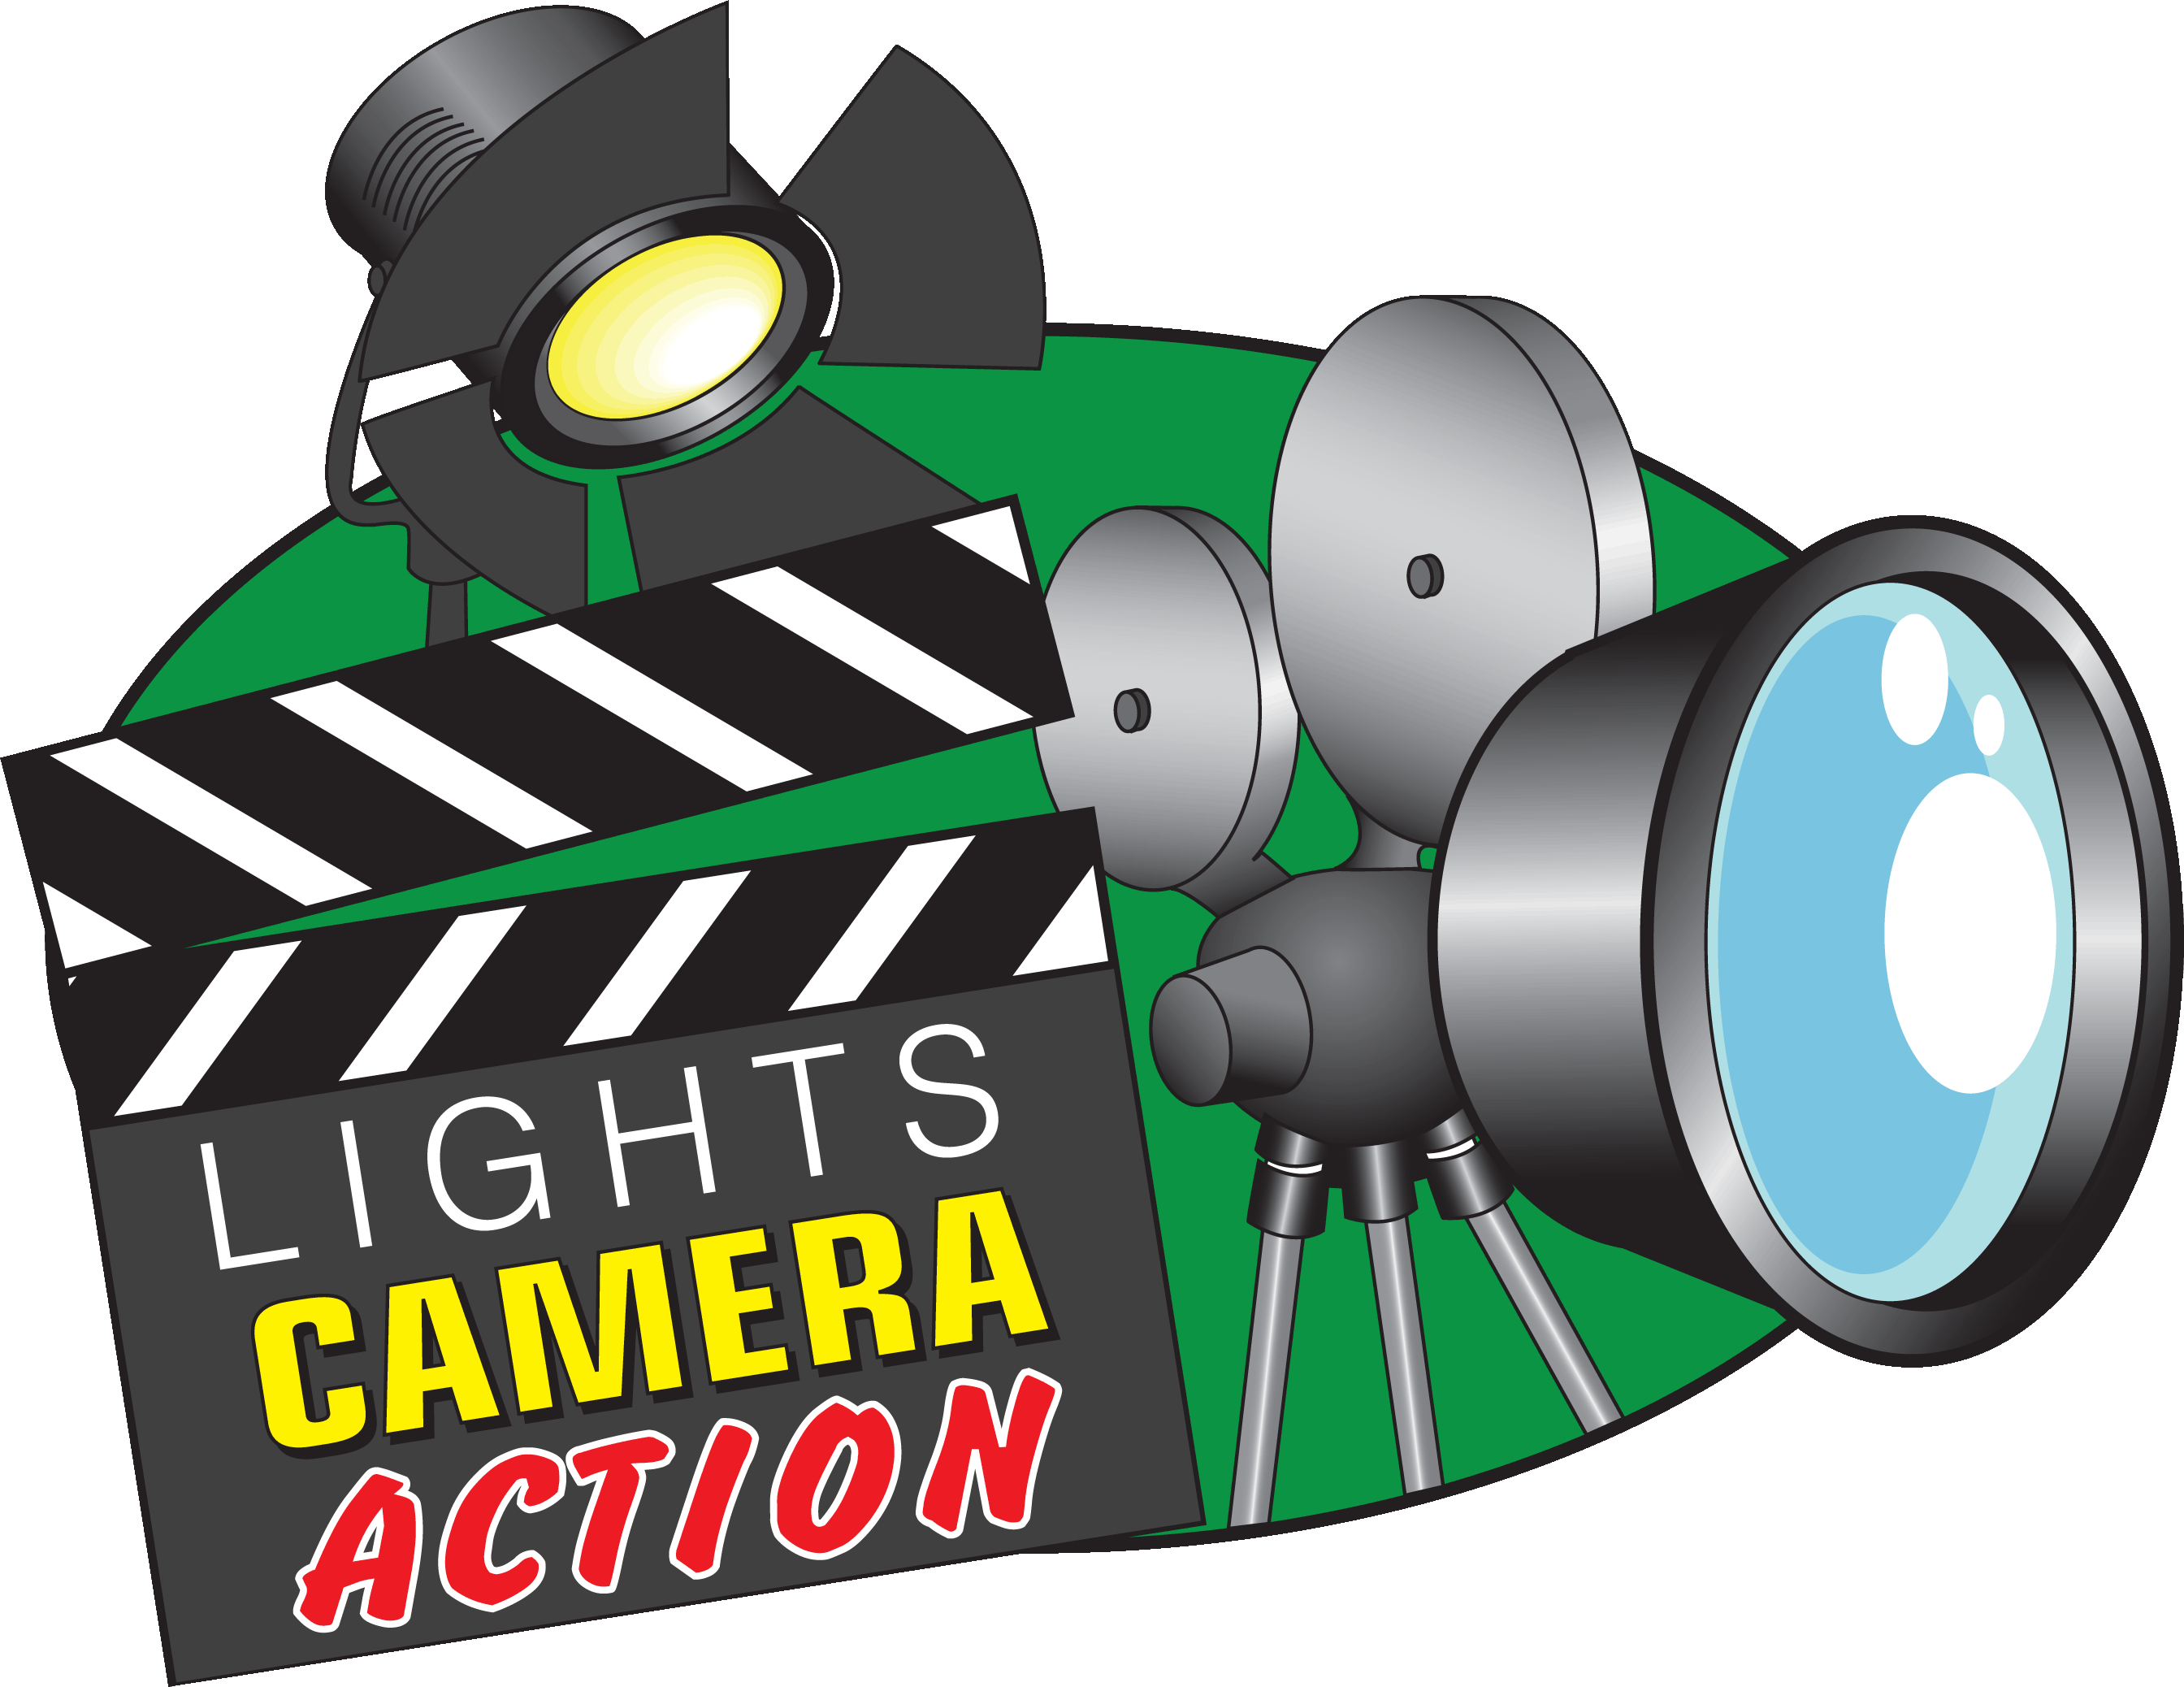 Lights camera action just. Theatre clipart movie star